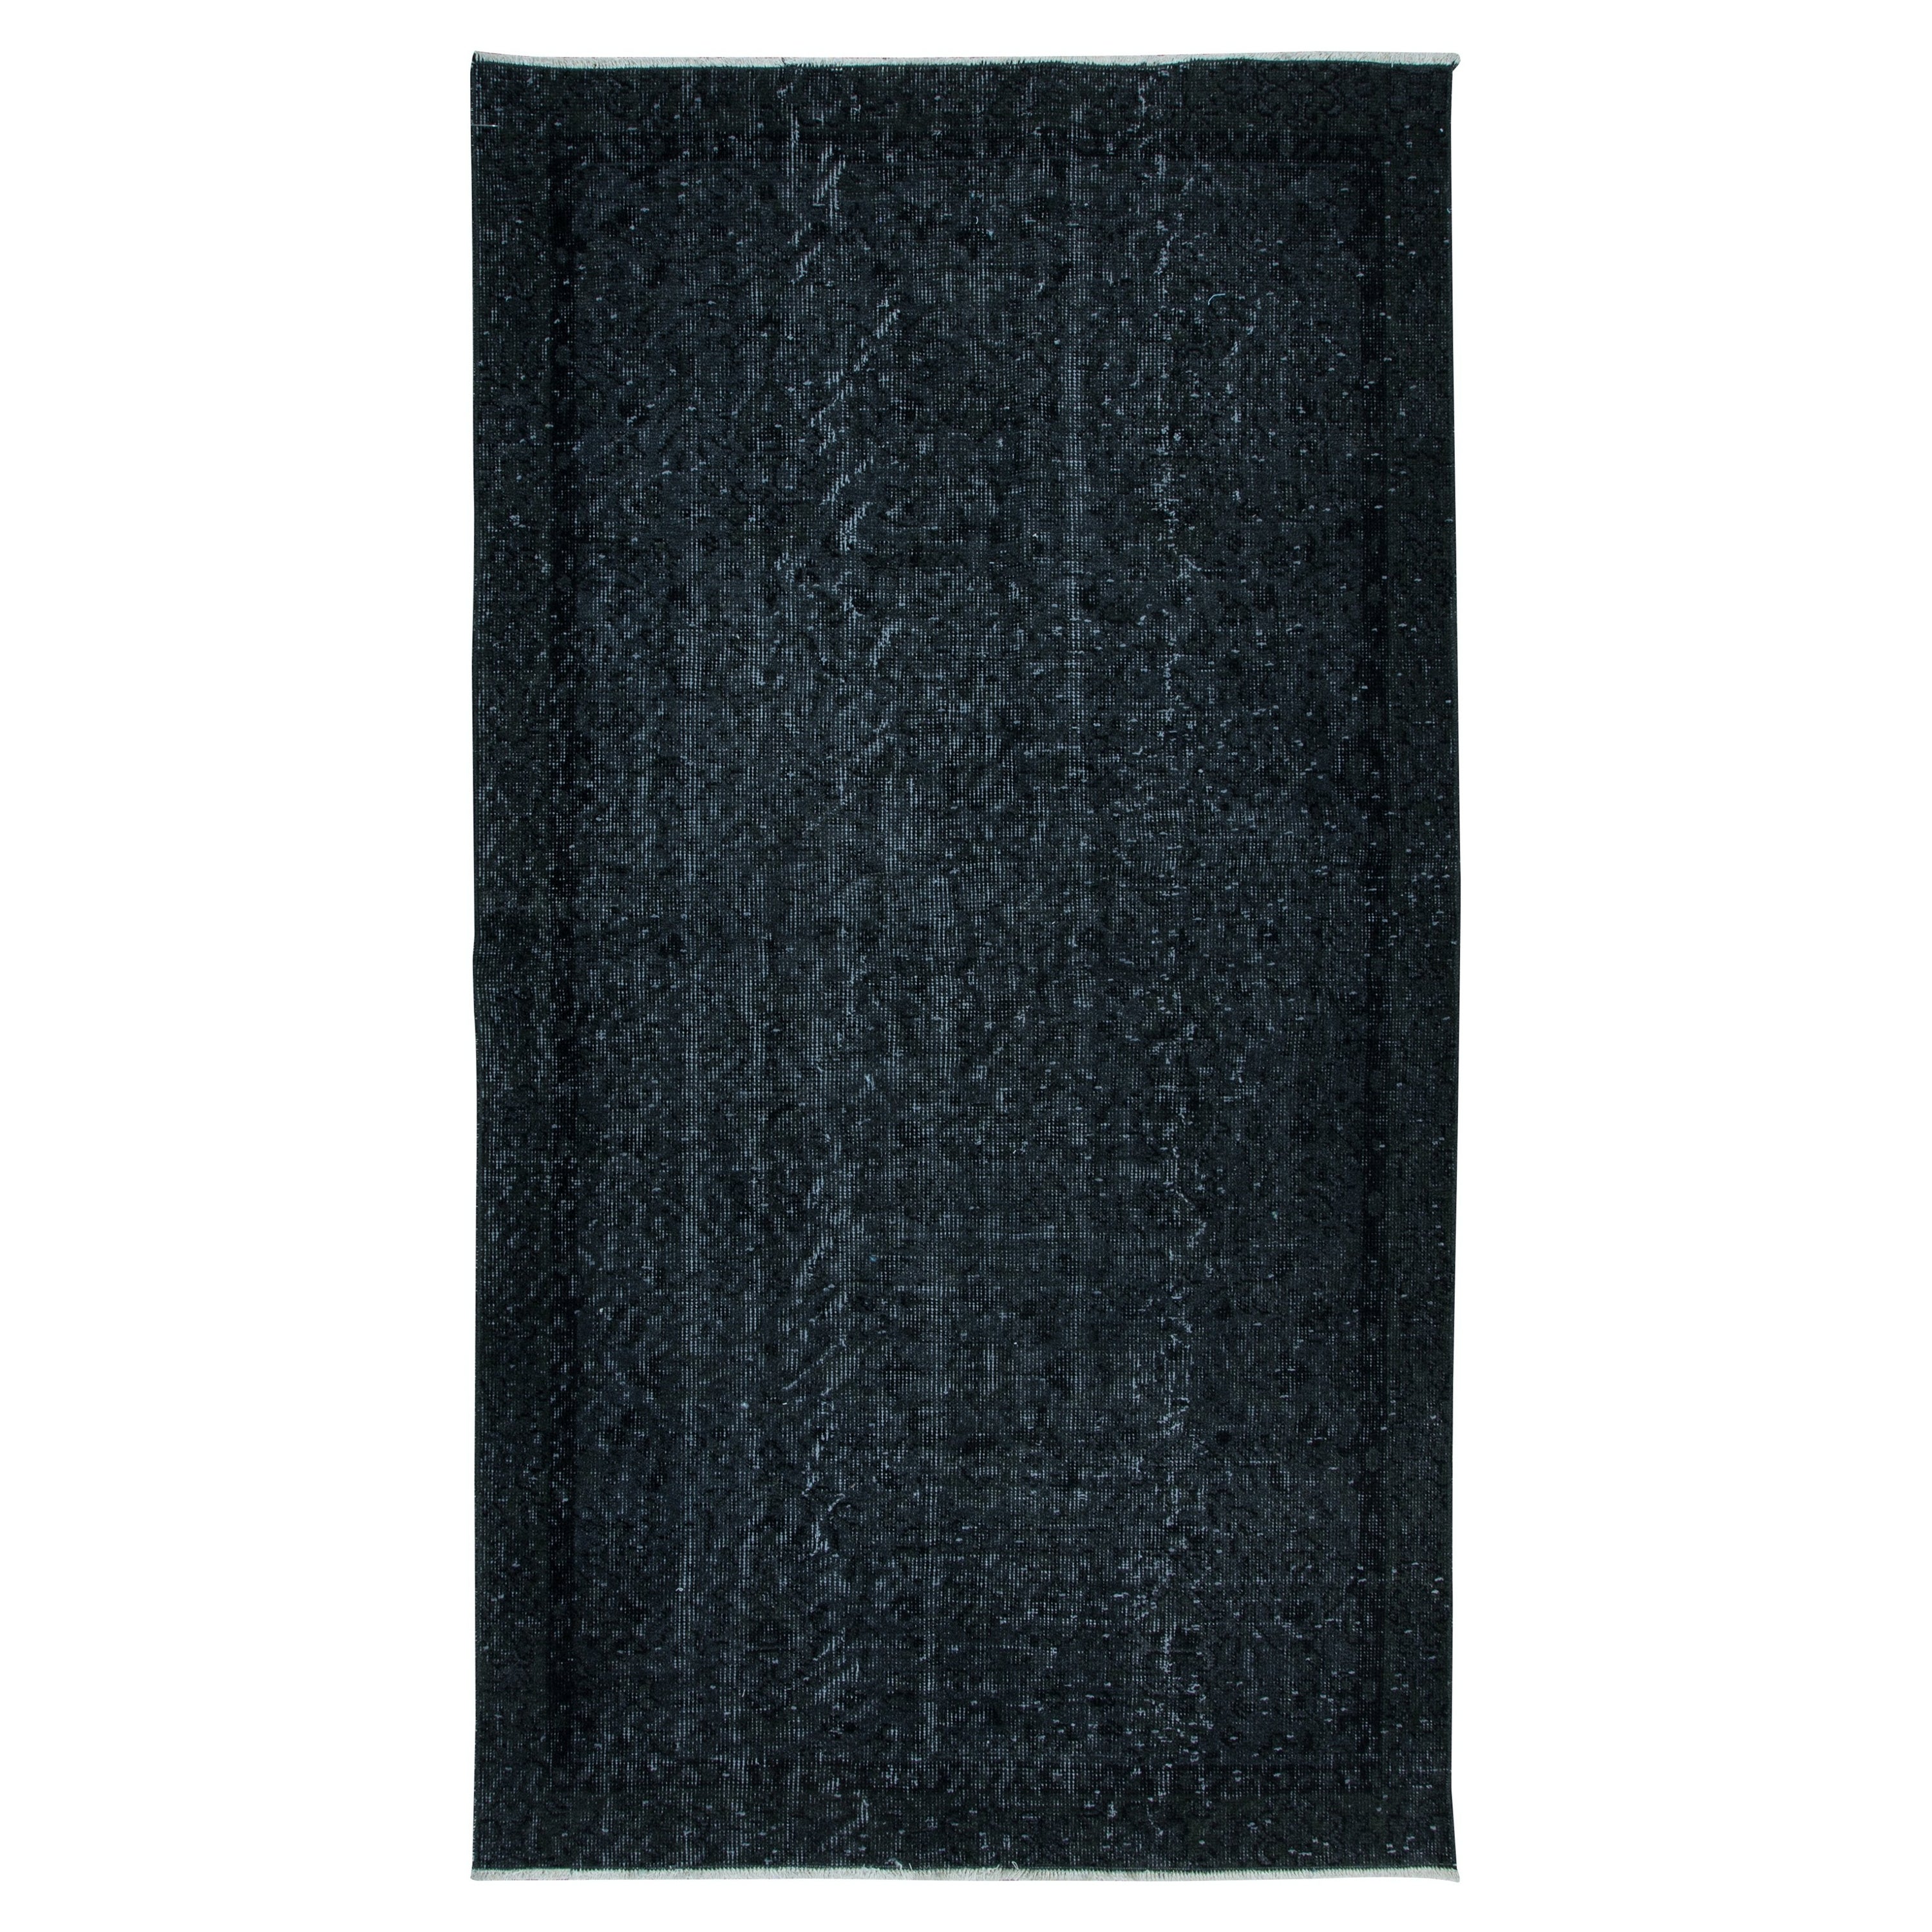 3.6x6.4 Ft Handmade Area Rug with in Black Colors, Contemporary Turkish Carpet For Sale